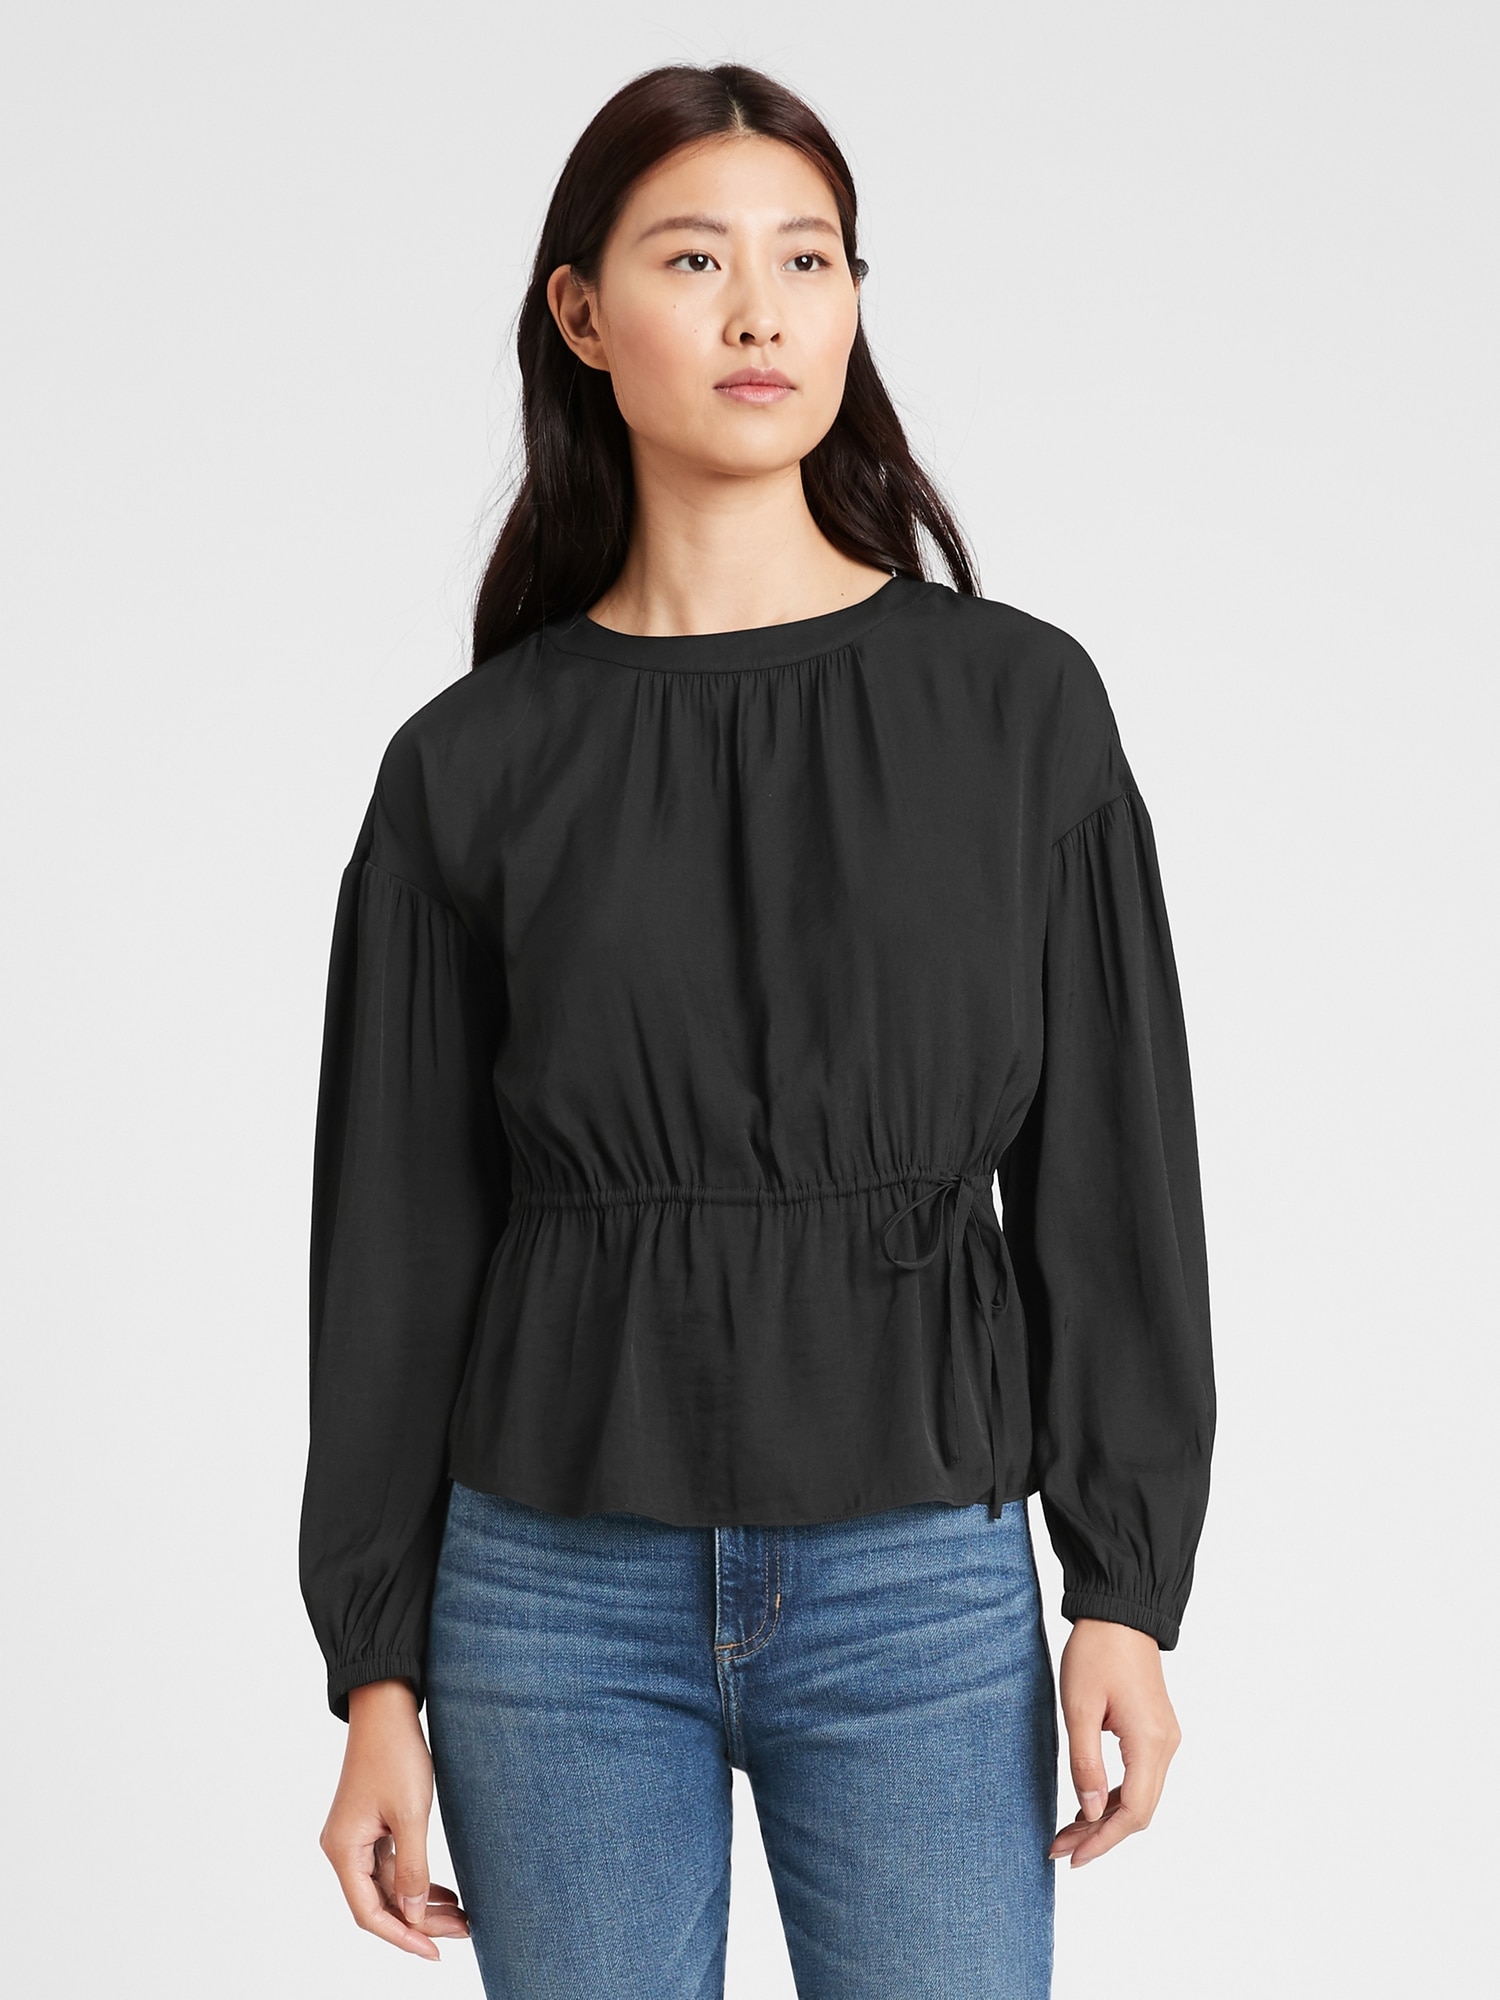 Relaxed Peasant Top